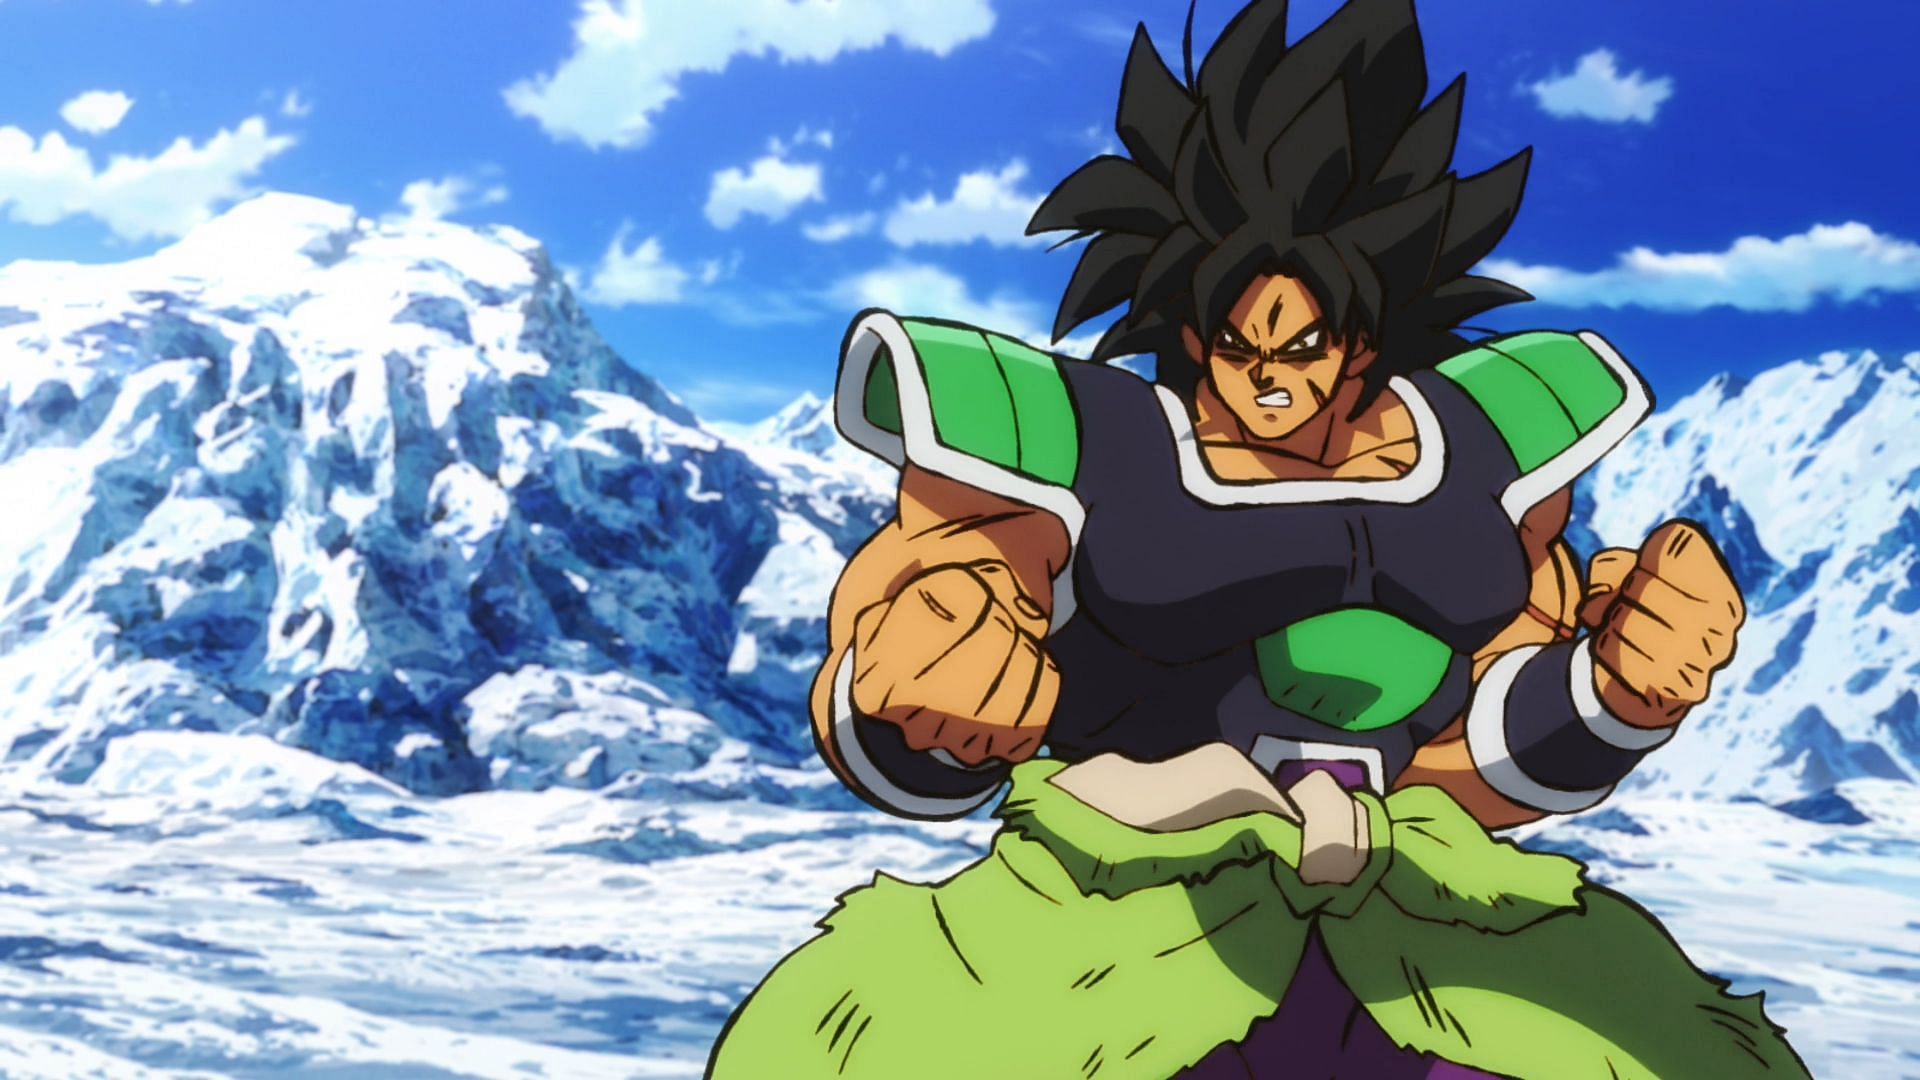 Broly from Dragon Ball Super Broly (Image by Toei Animation)